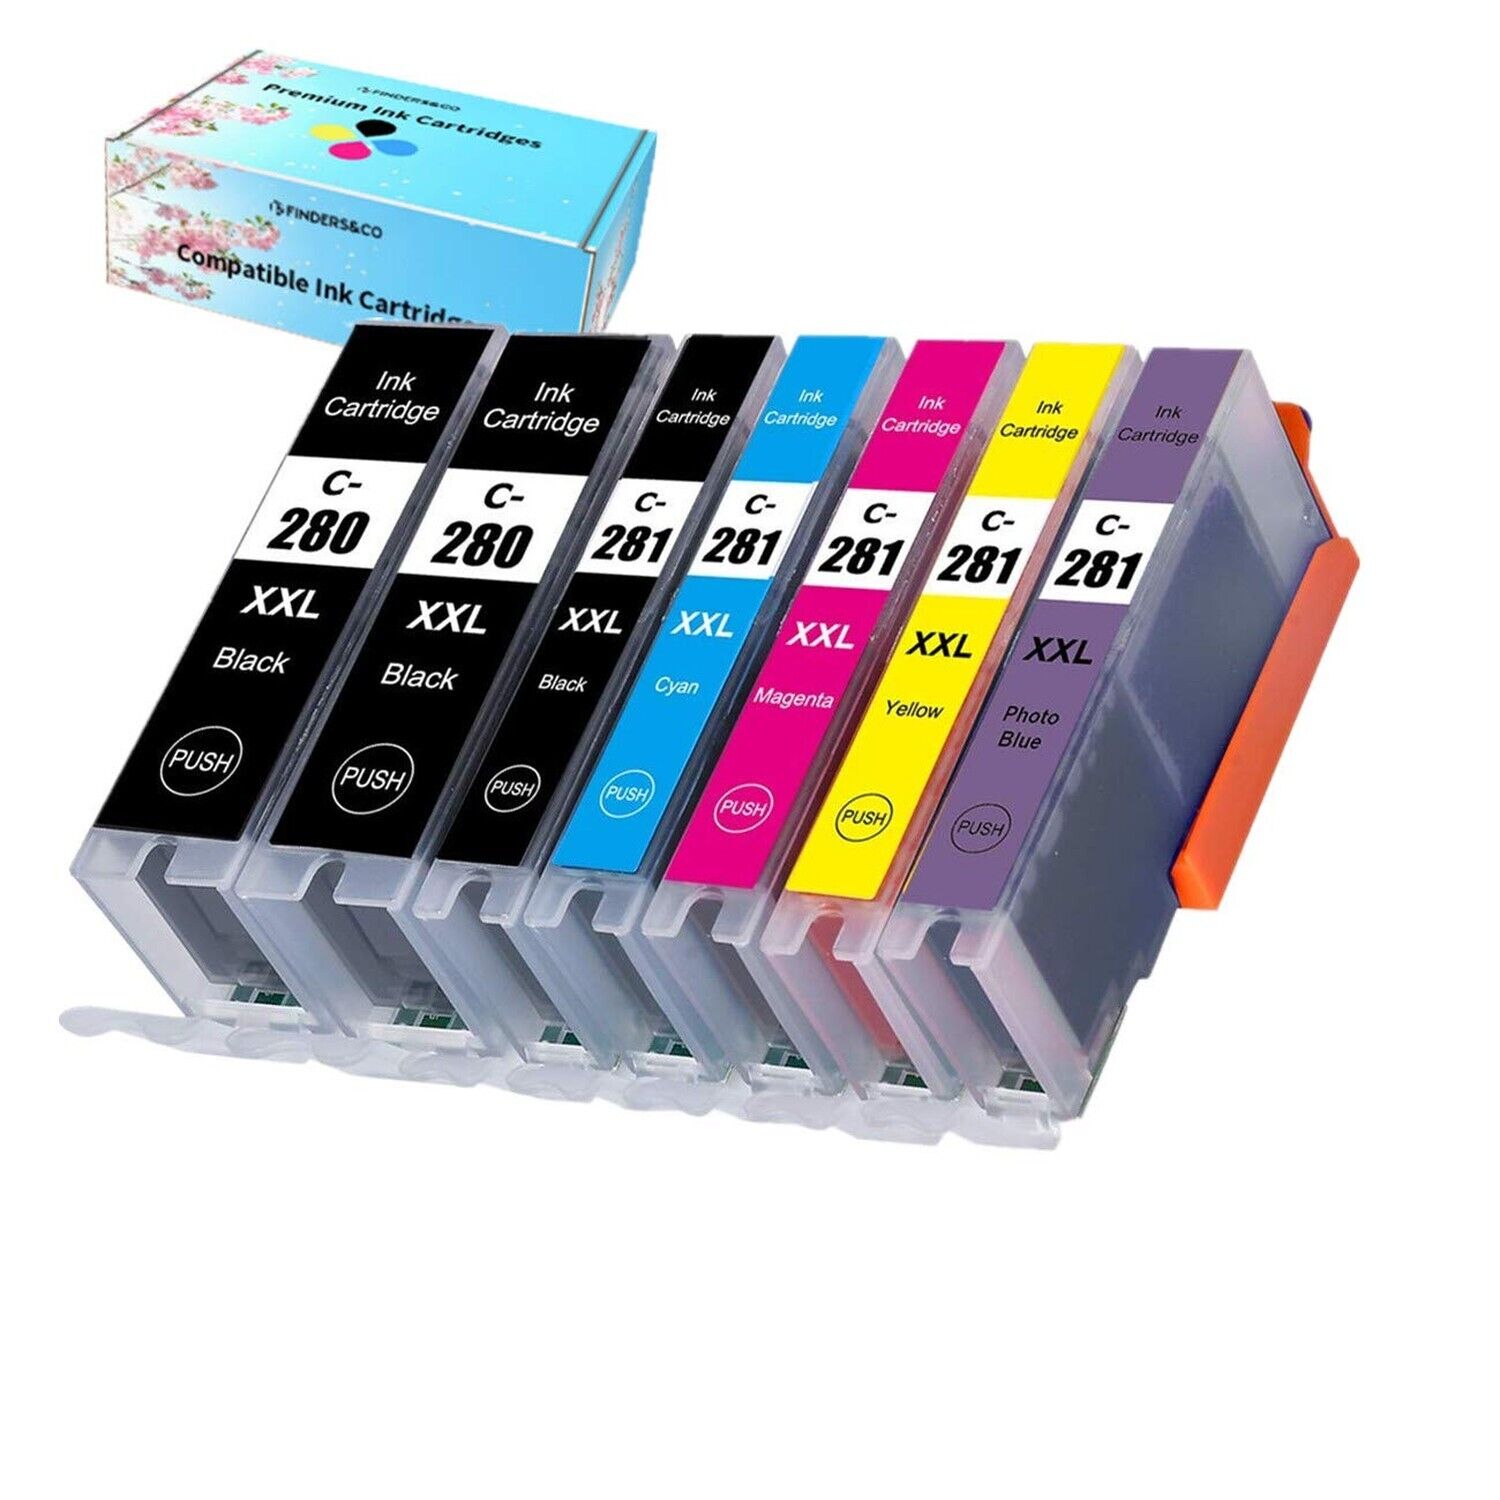 F FINDERS&CO Compatible Ink Cartridge Replacement for Canon PGI-280 CLI-281 X...